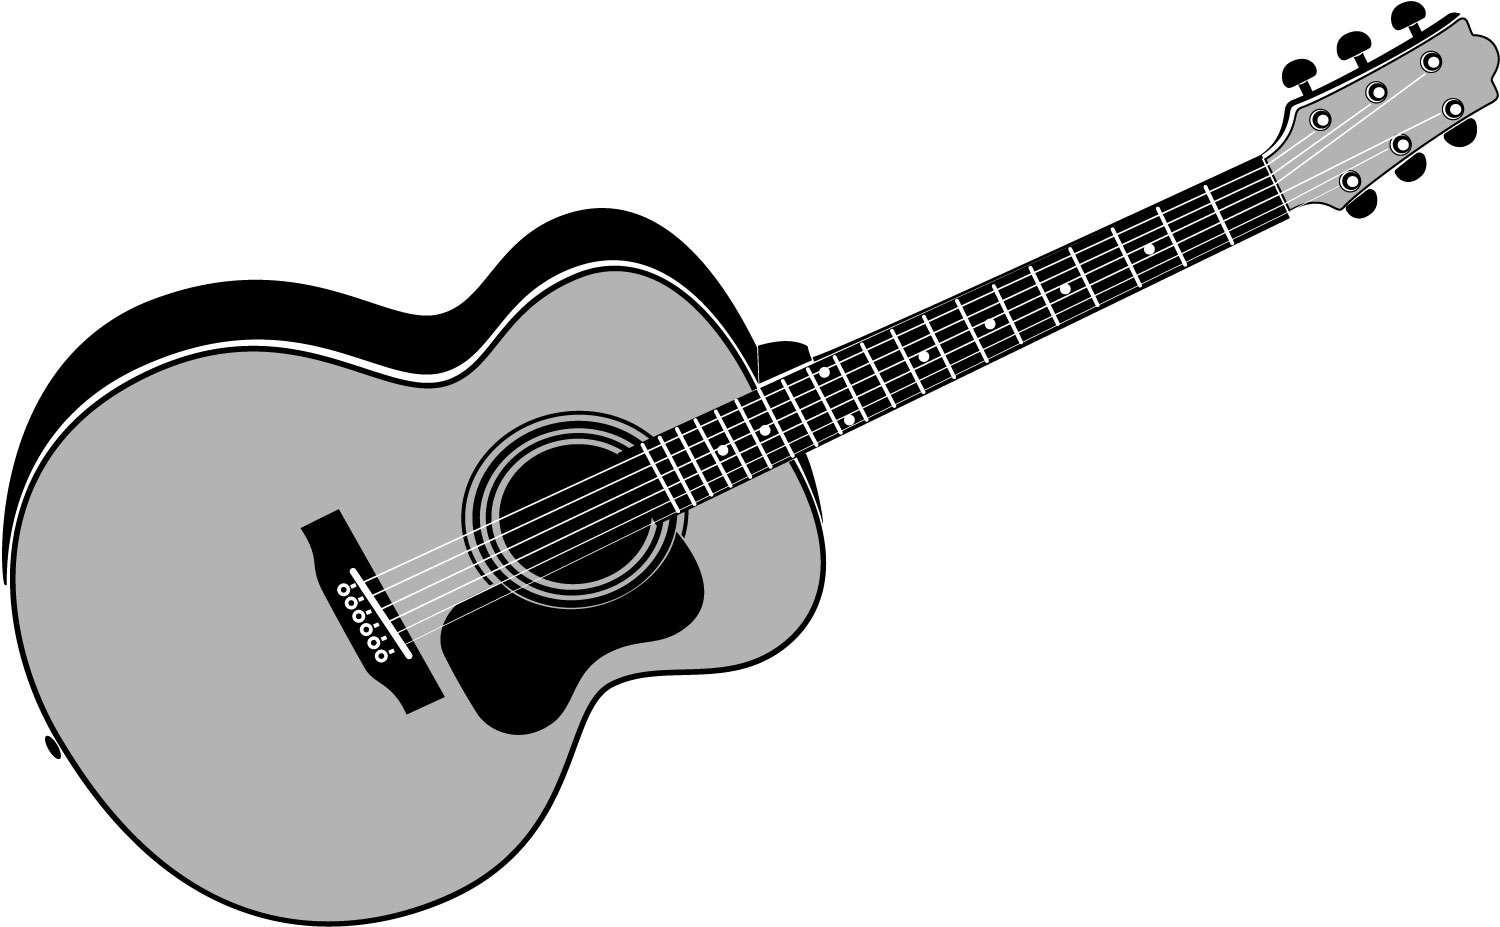 Guitar clipart free music graphics image 0